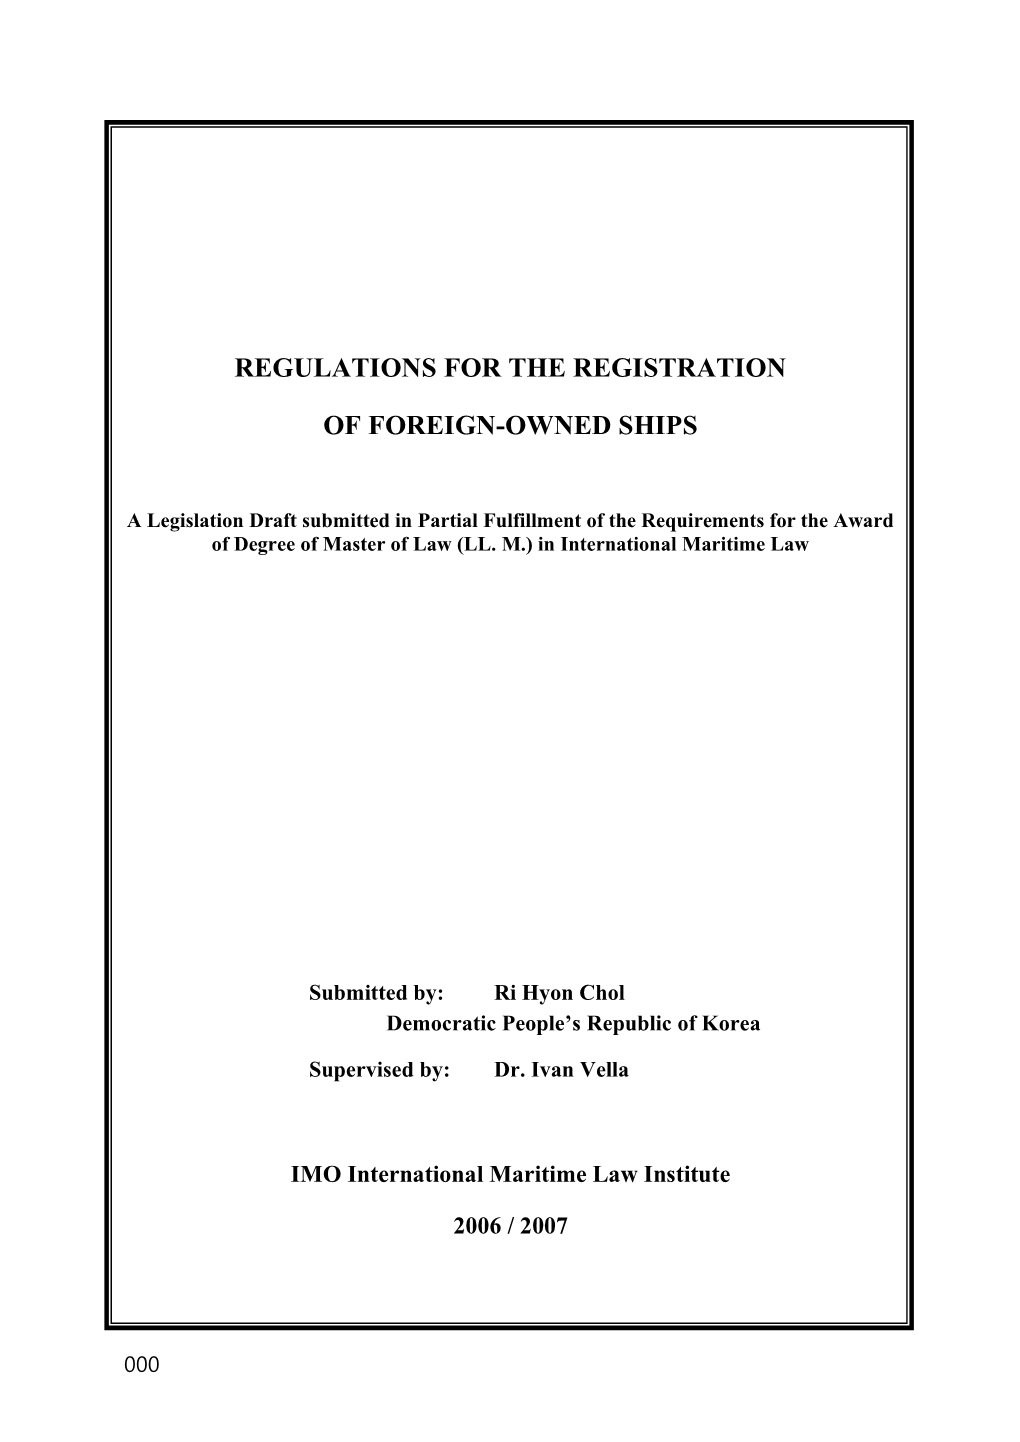 Regulations for the Registration of Foreign-Owned Ships and Enhancing Flag State Control As Well Since Beginning of This Year